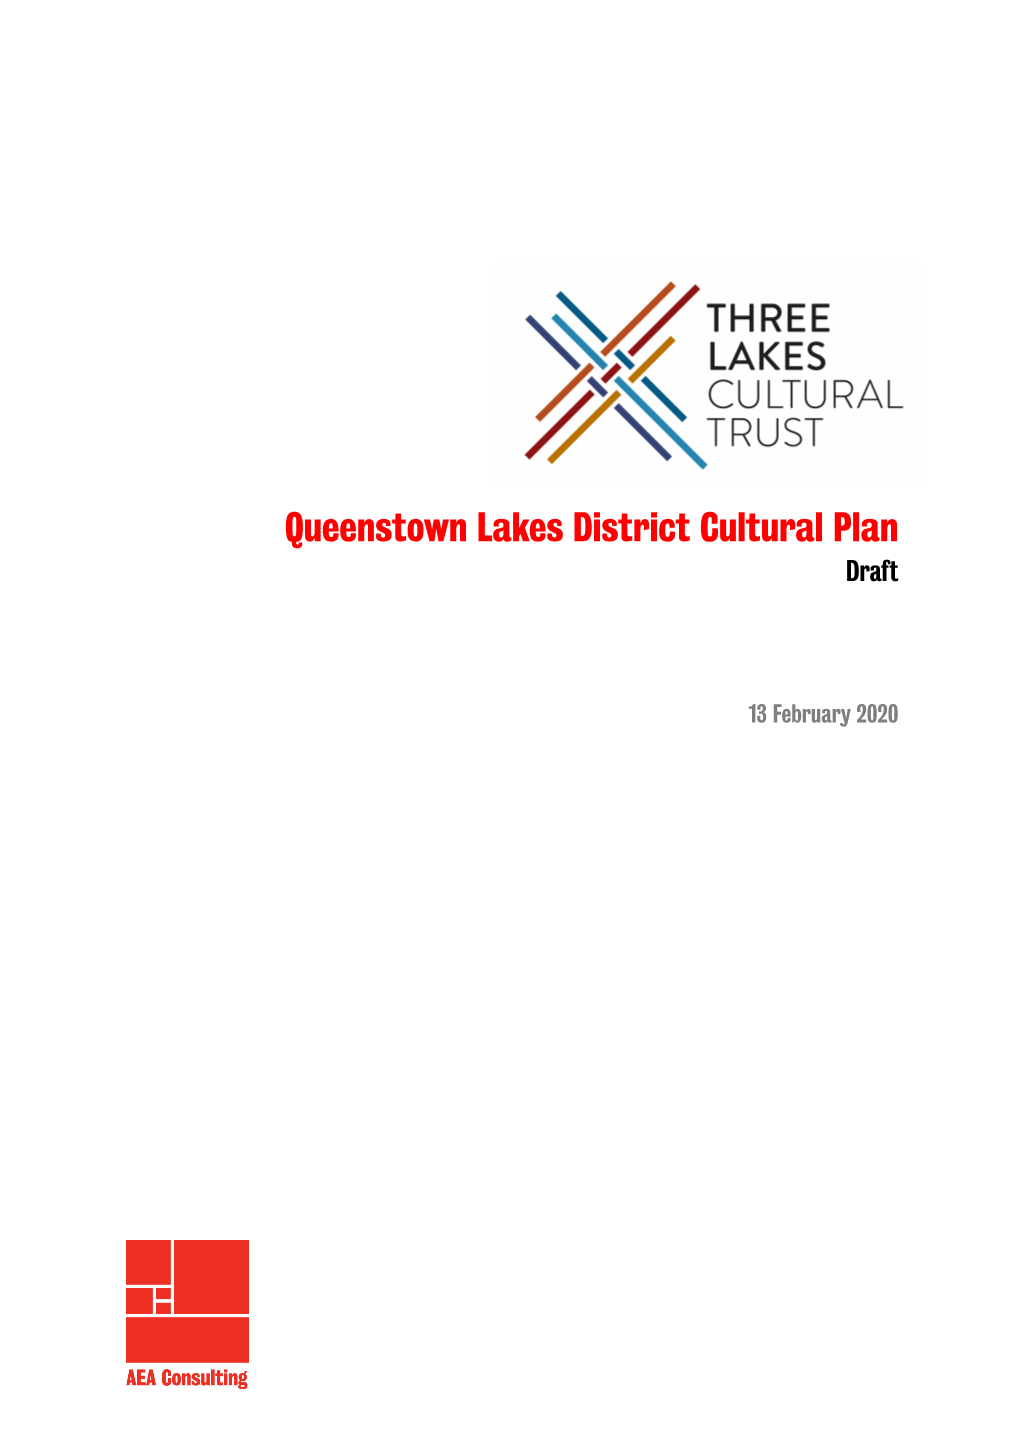 Queenstown Lakes District Cultural Plan Draft